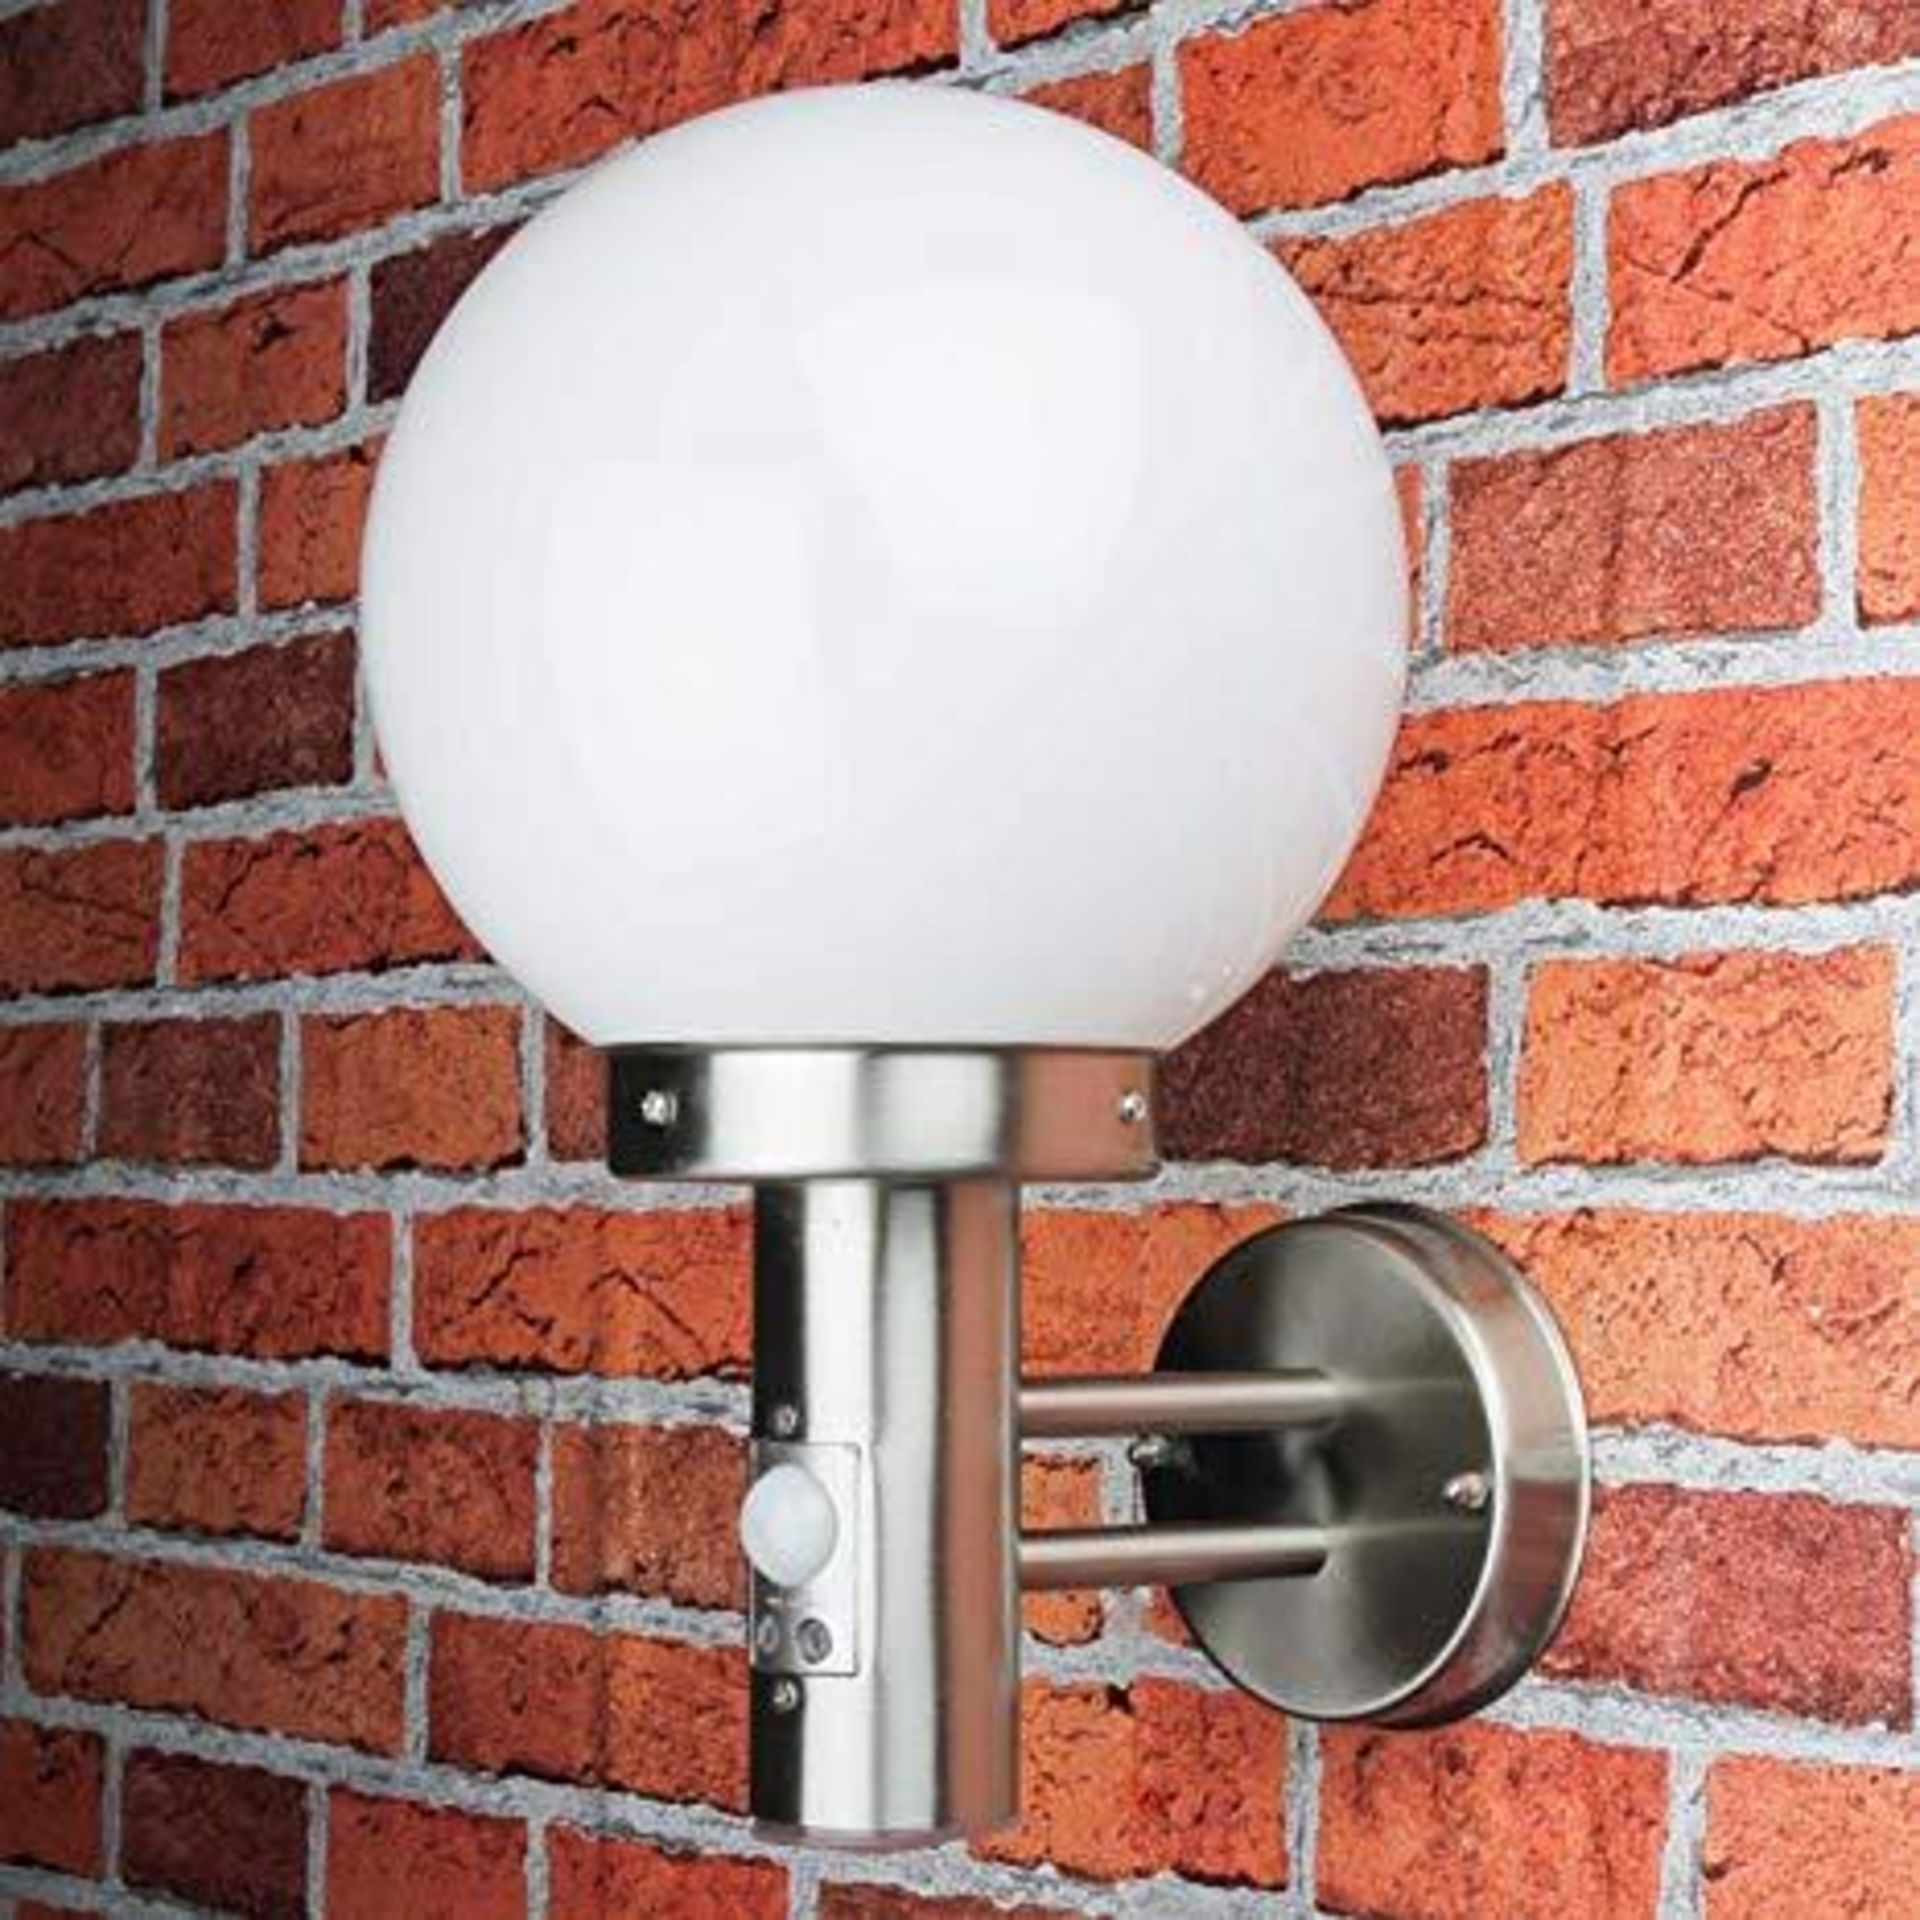 2 x Globe Outdoor Wall Light With PIR Motion Sensor - Stainless Steel With Polycarbonate Shade - IP4 - Image 3 of 5